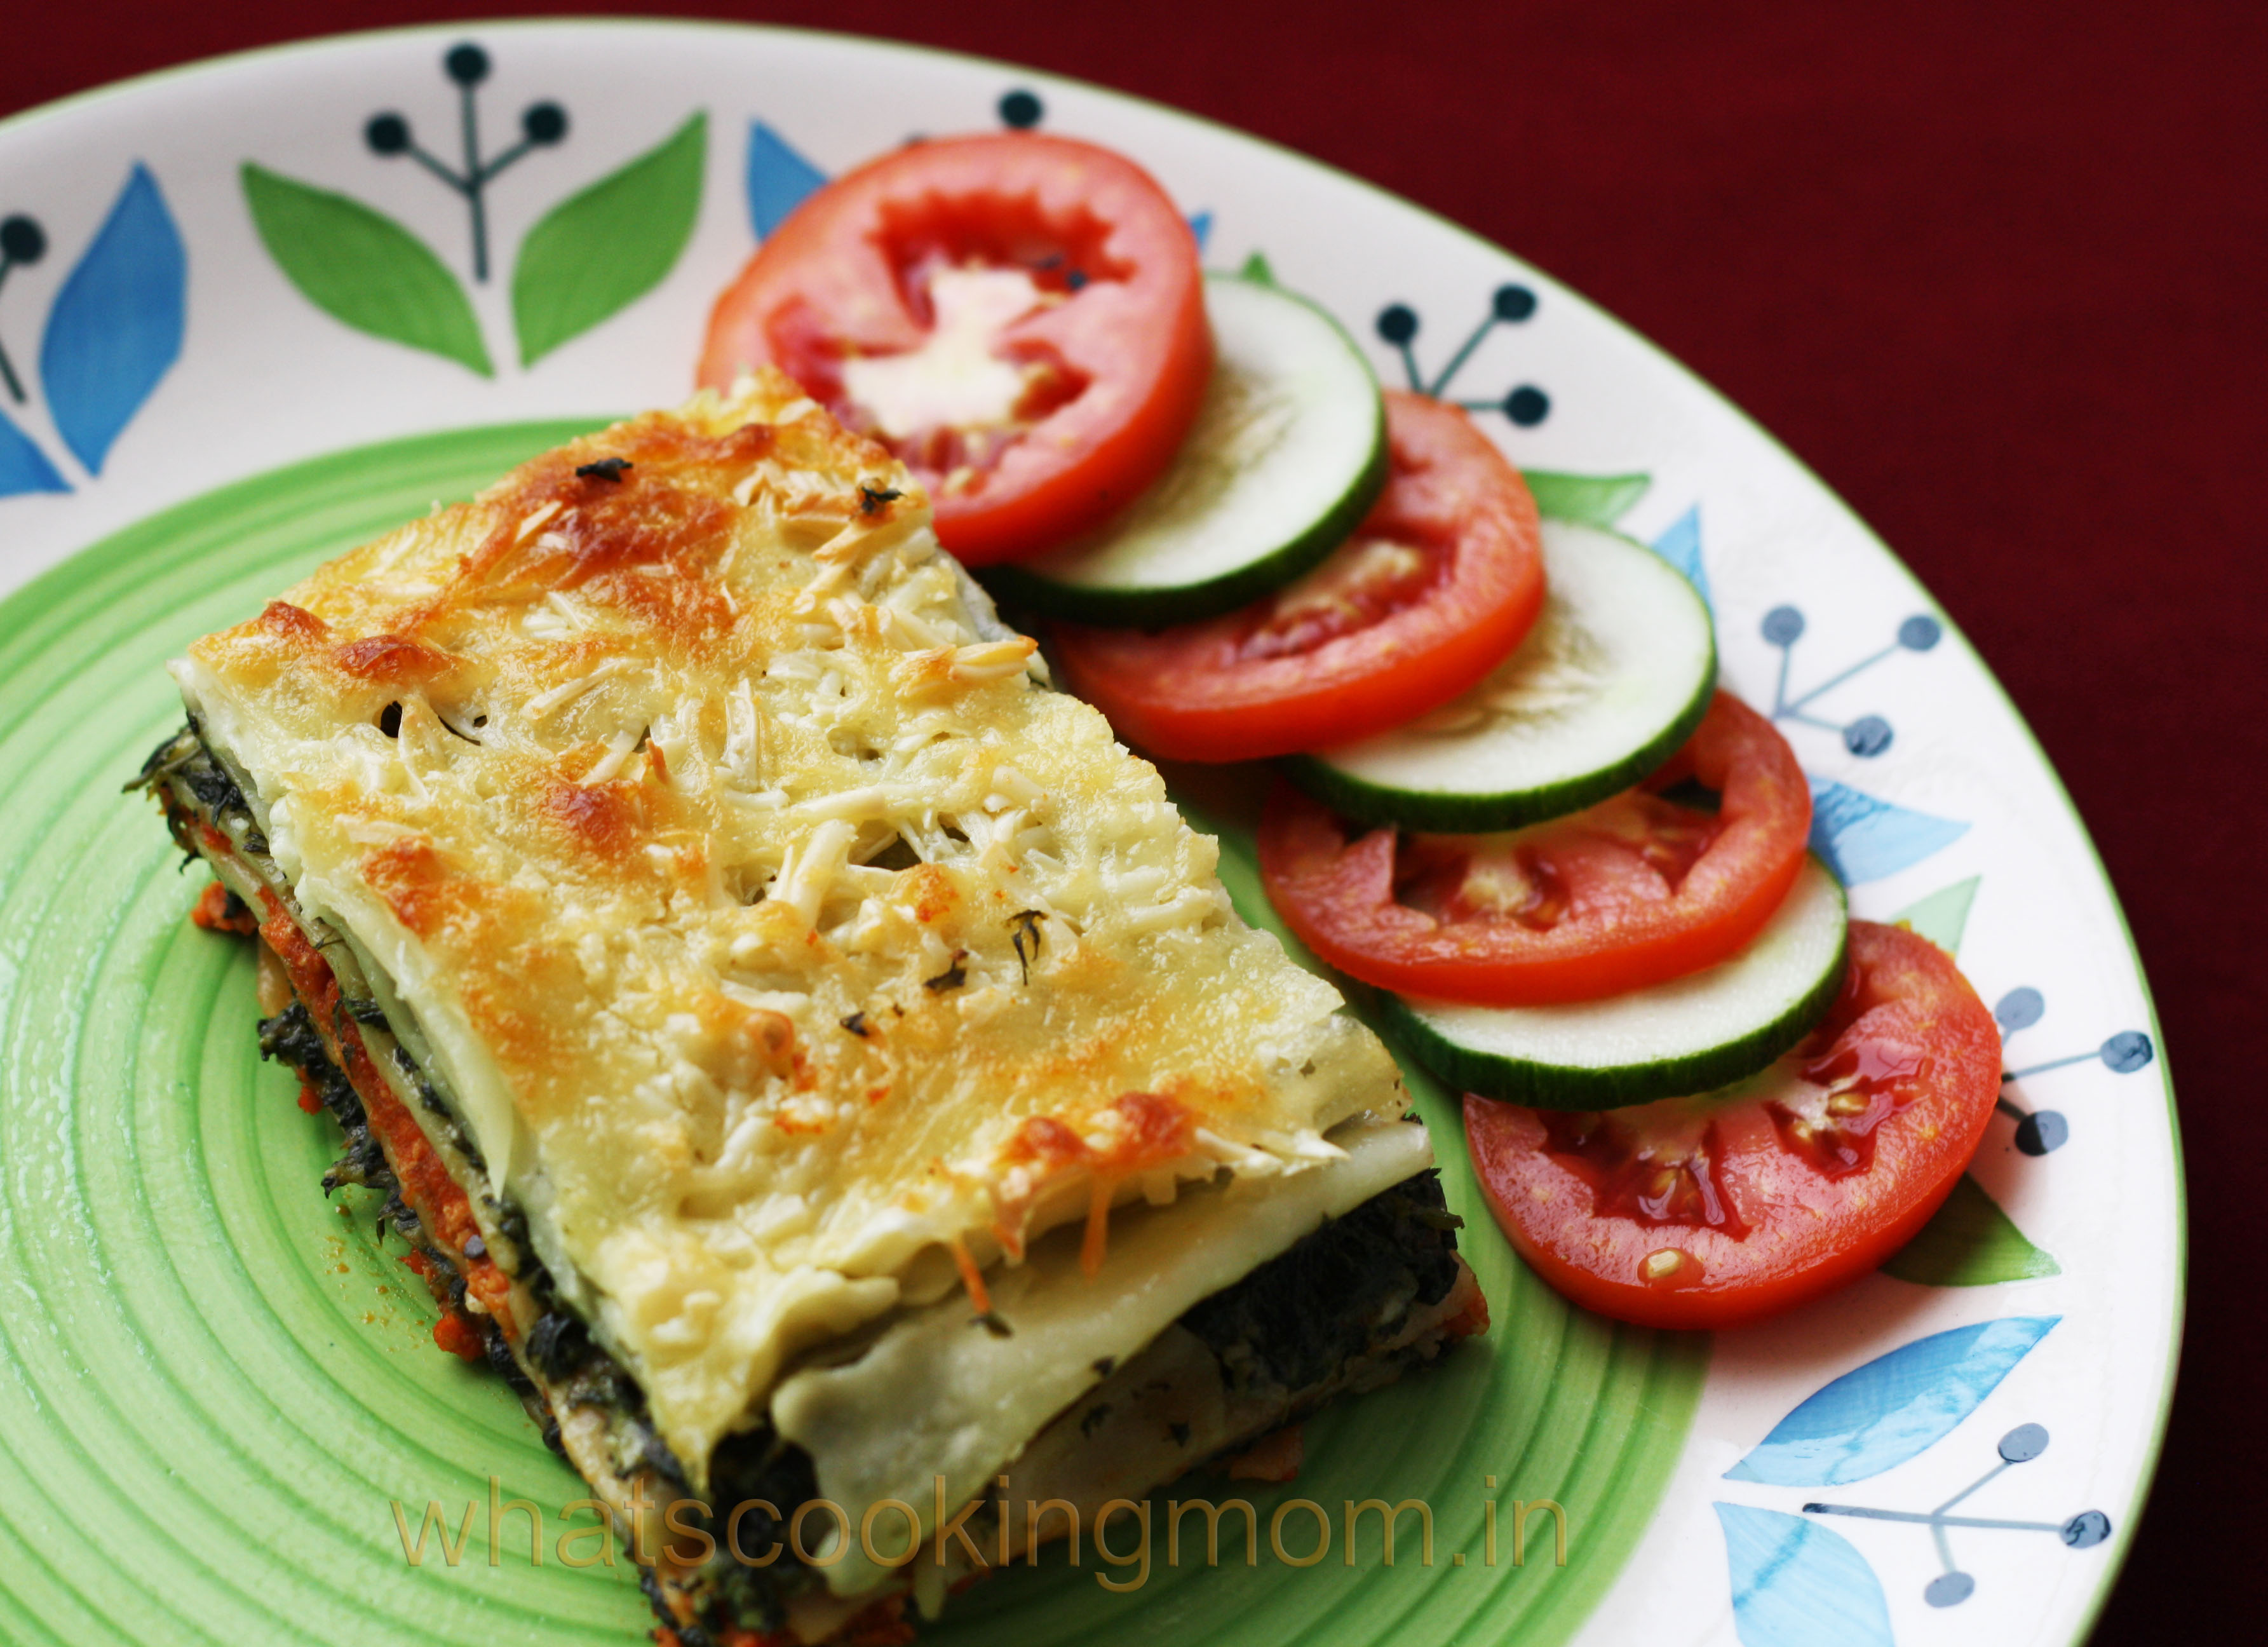 Vegetarian Spinach Lasagna with salad served on a plate